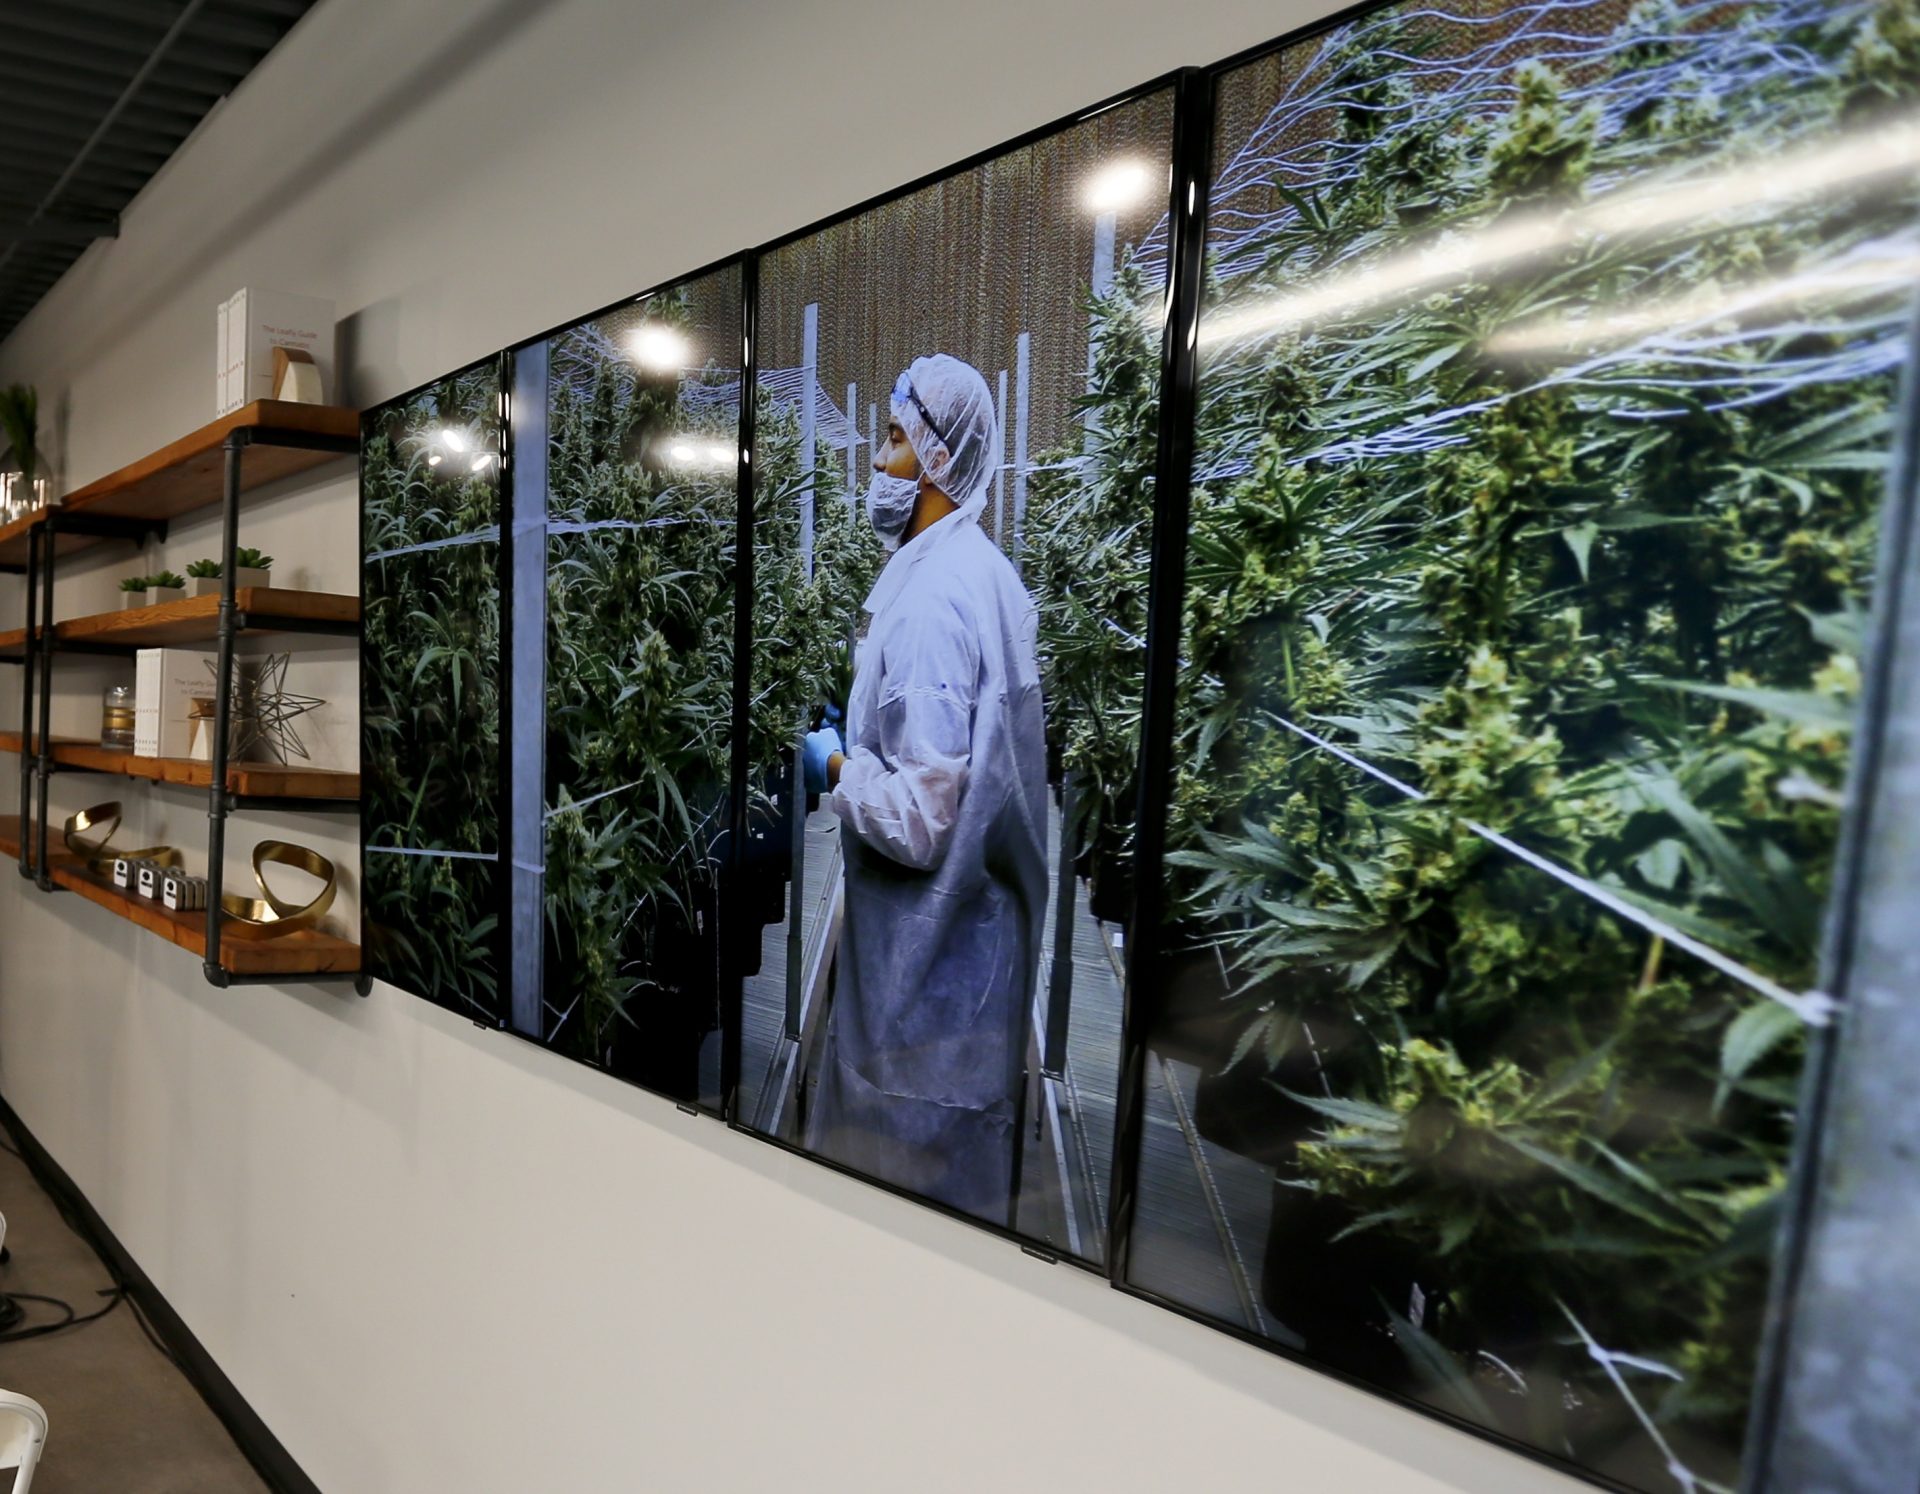 FILE PHOTO: Photographs of marijuana plants are on the wall beside shelves of product displays during an open house and media availability for the opening of CY+ Medical marijuana Dispensary, Thursday, Feb. 1, 2018 in Butler, Pa